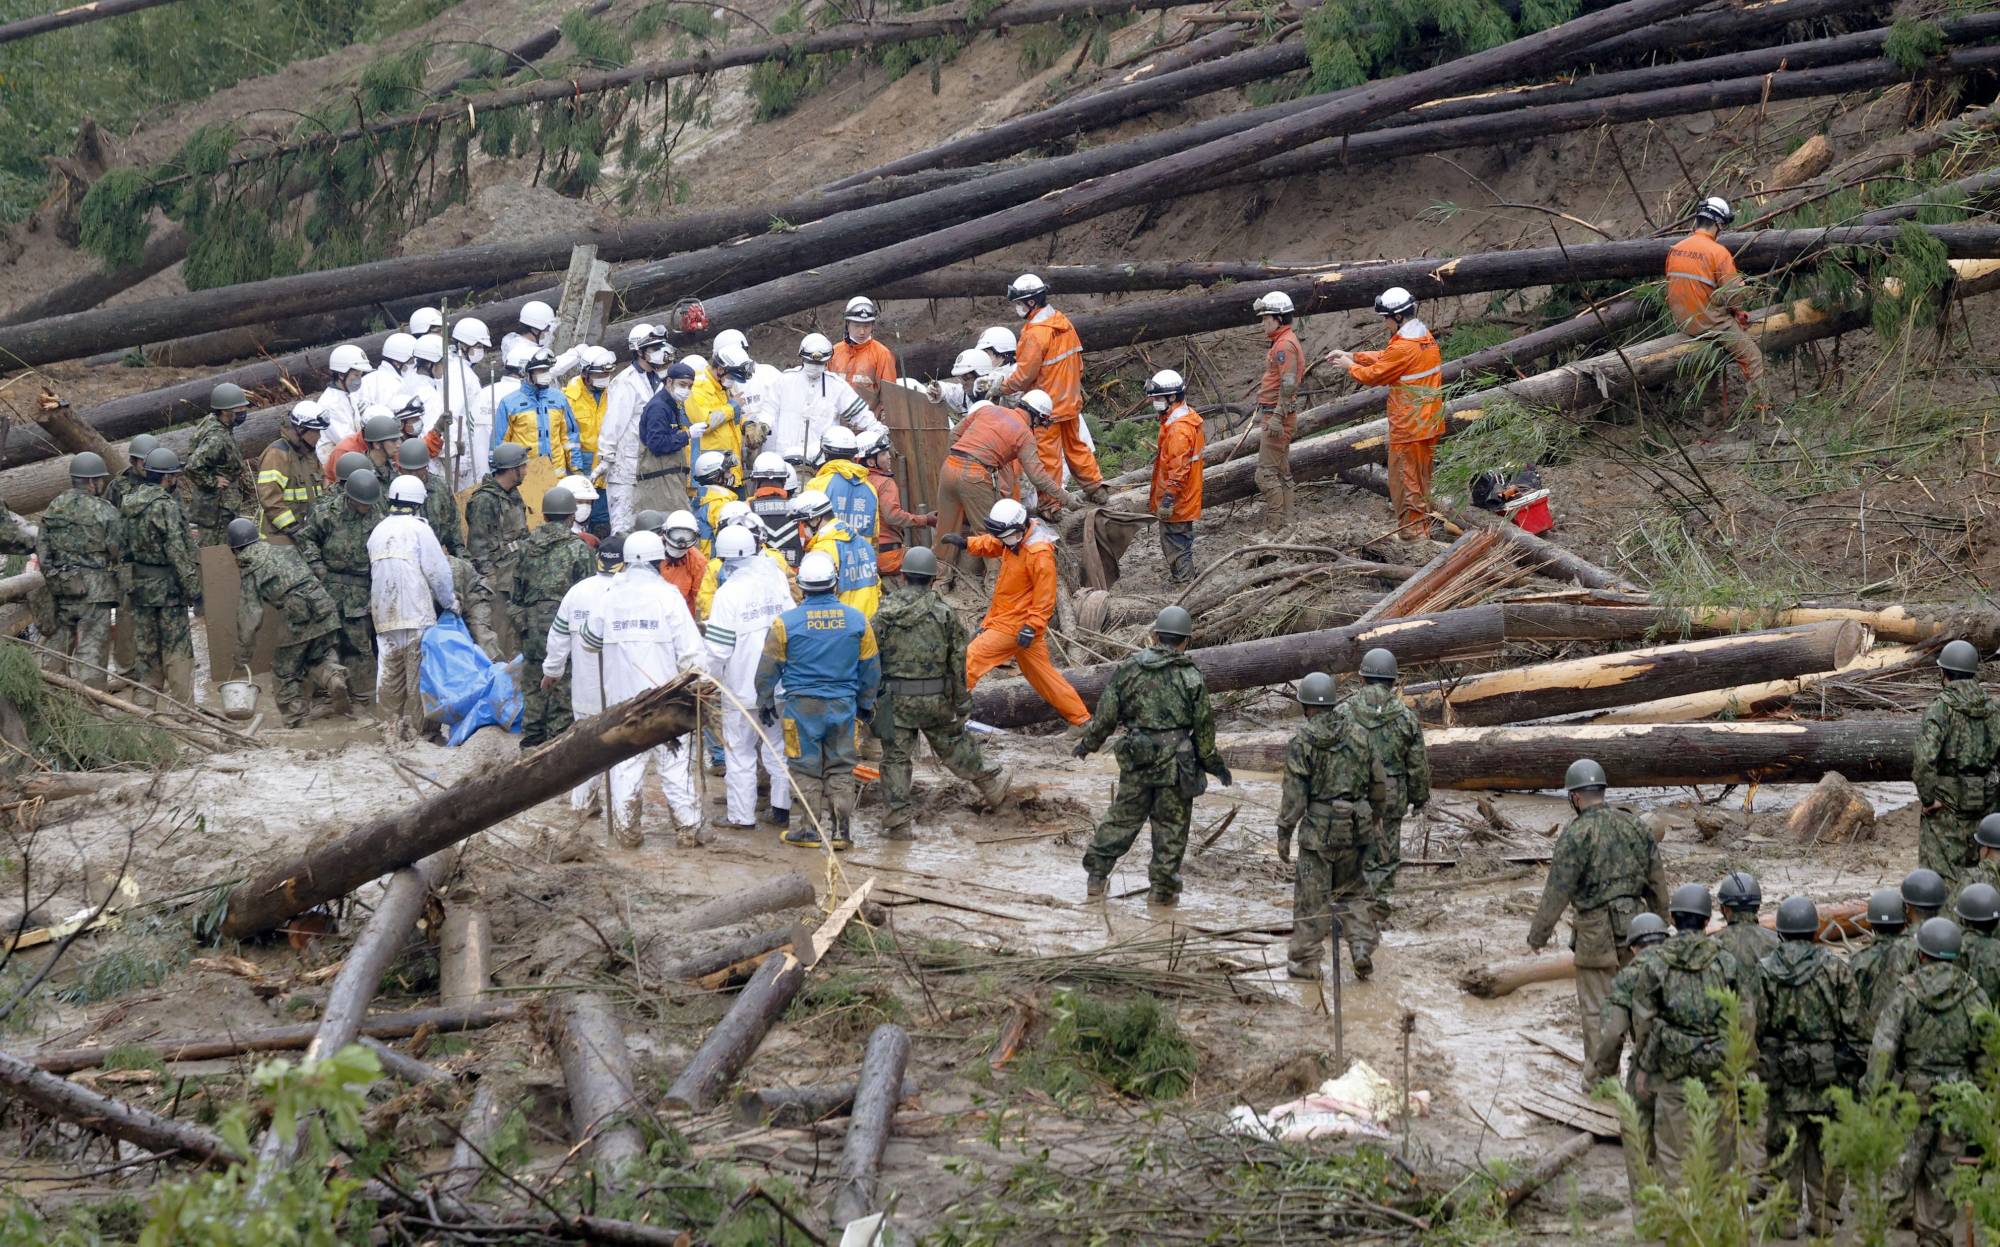 Rescuers search the area of a mudslide where a man in his 40s went missing in Mimata, Miyazaki Prefecture, on Monday. | KYODO